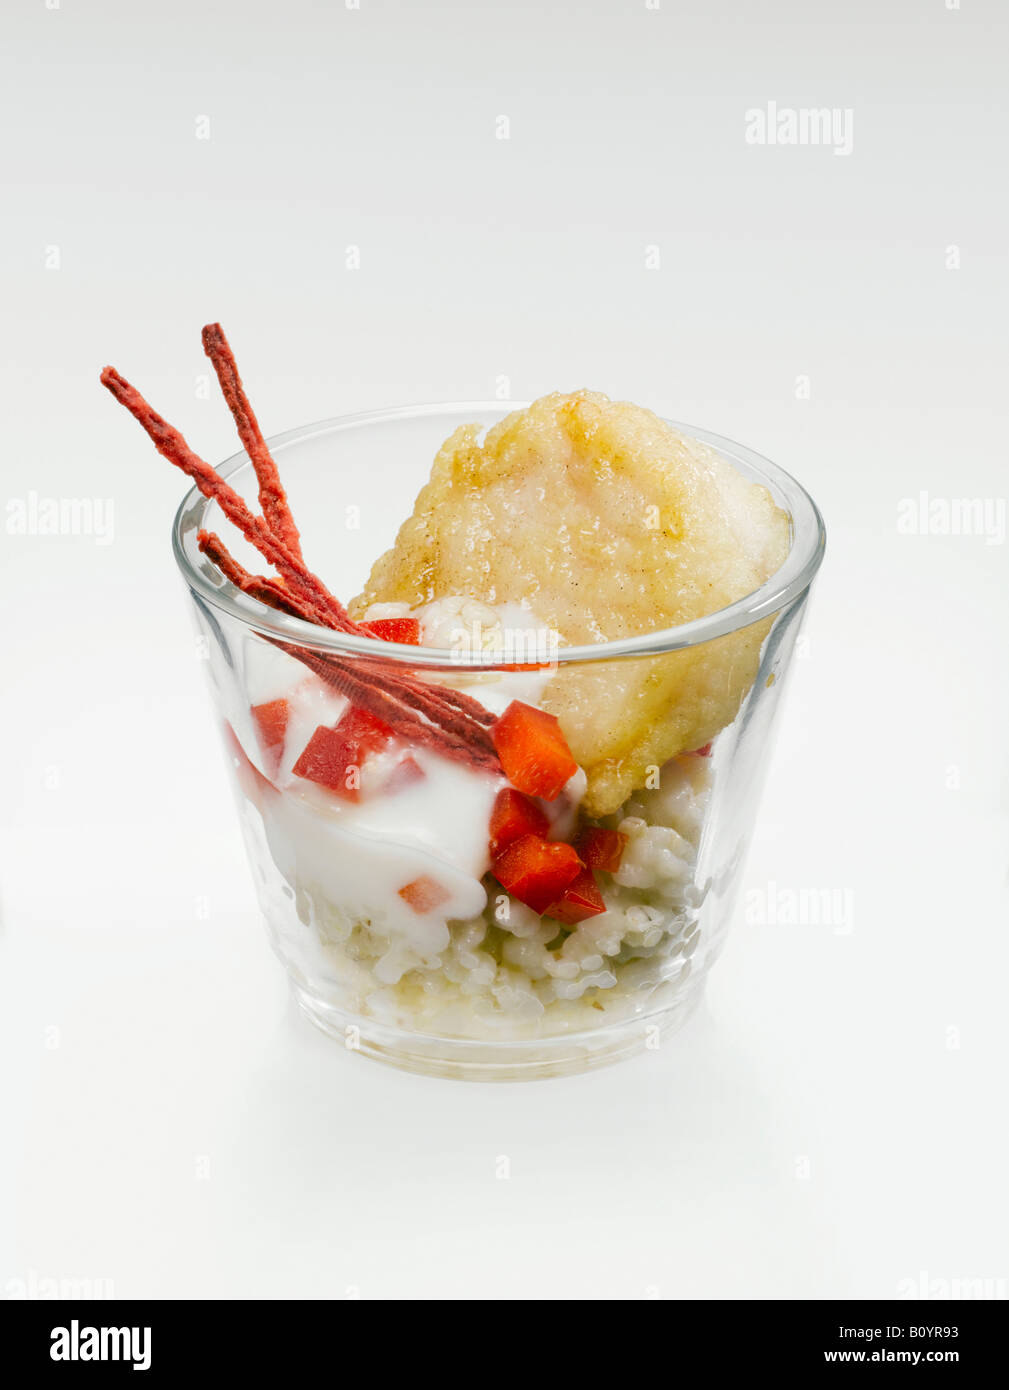 Fried Pangasius Filet with risotto rice in glass Stock Photo